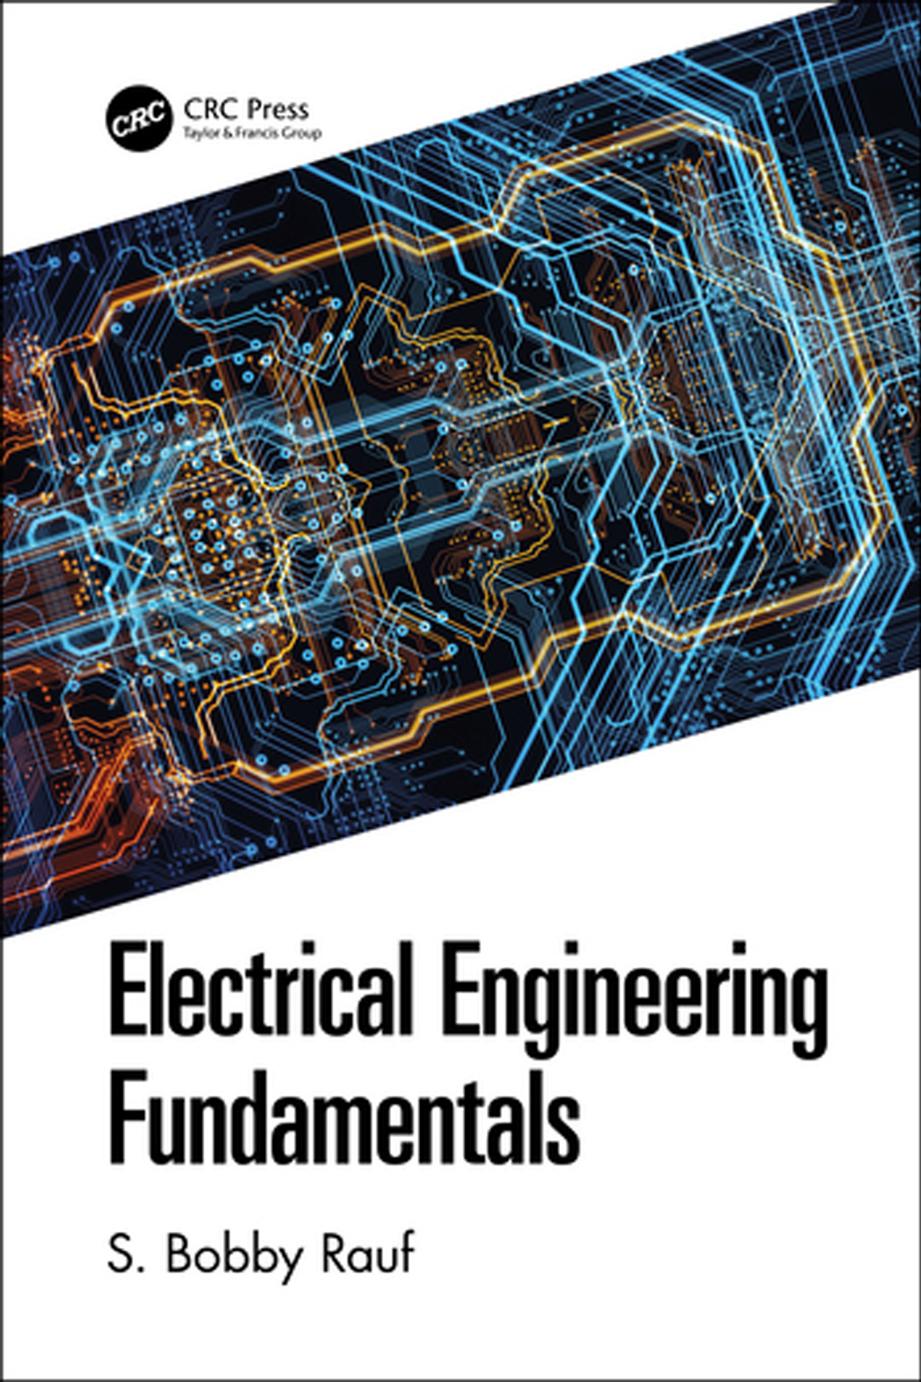 Electrical Engineering Fundamentals by S. Bobby Rauf